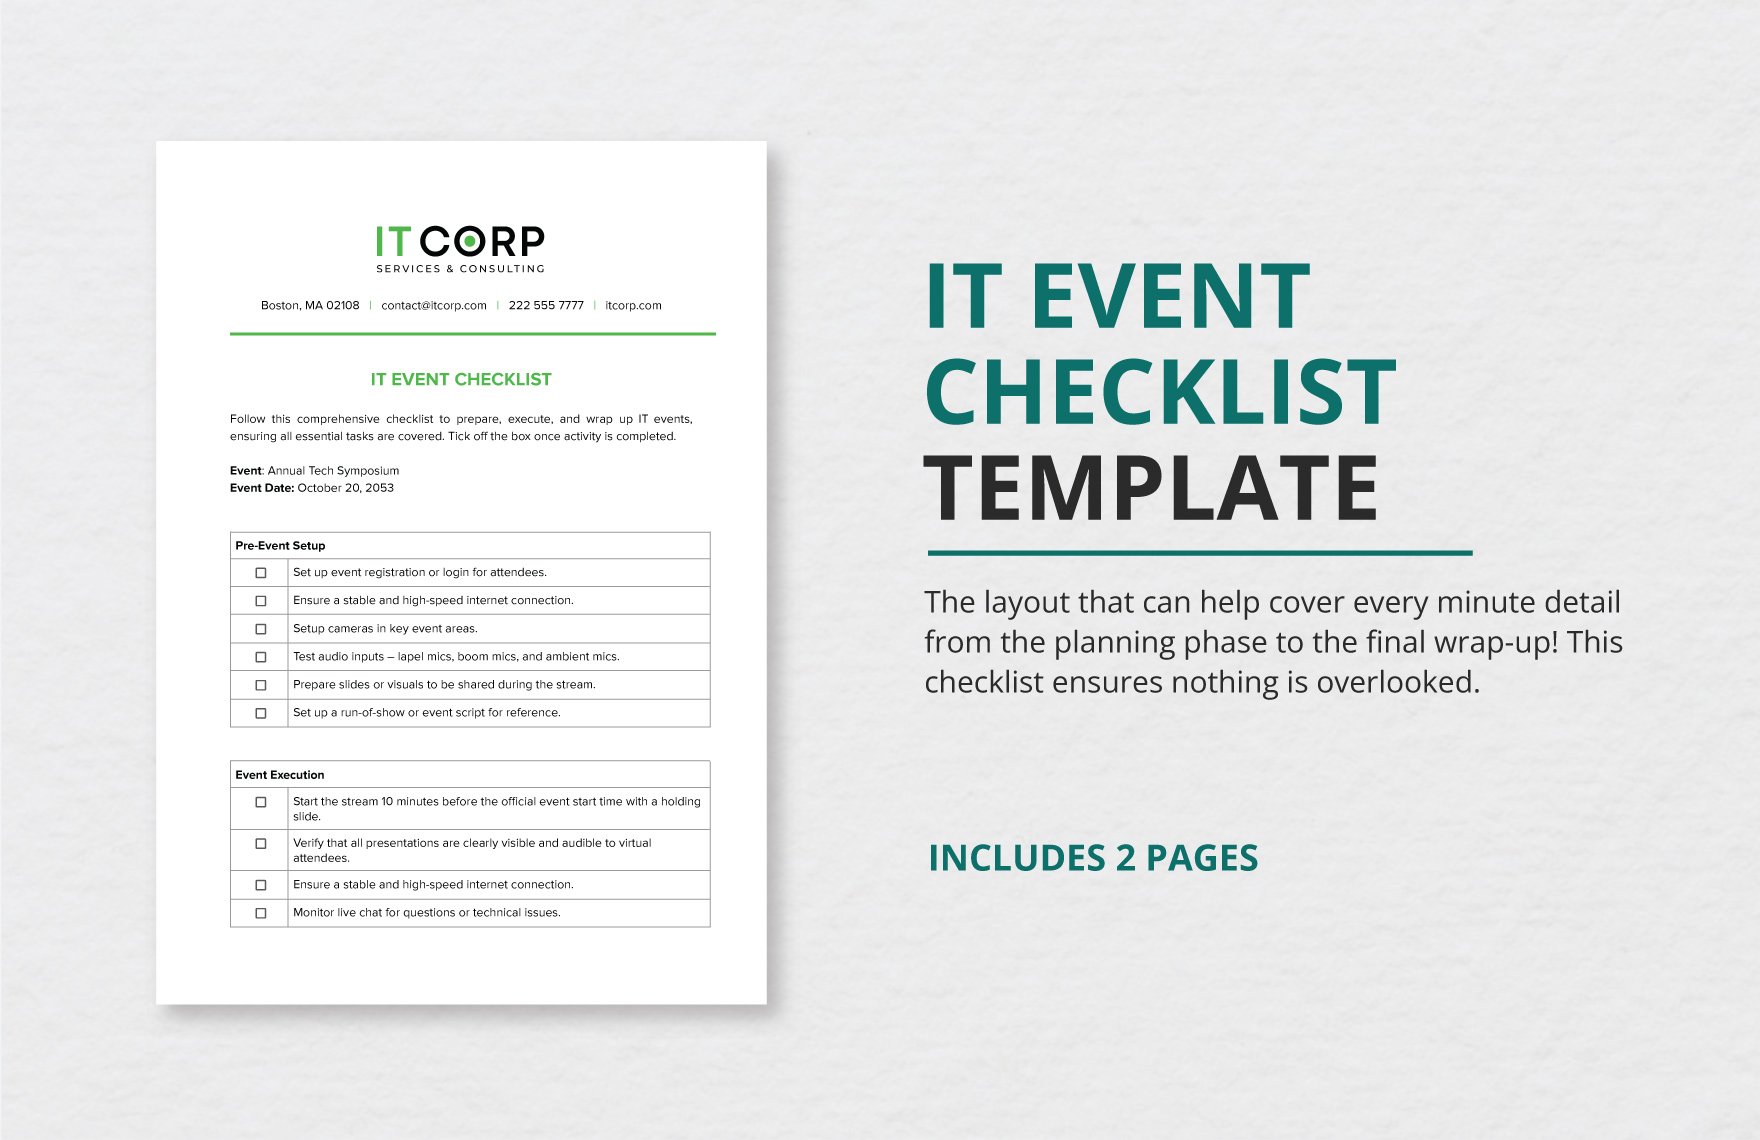 IT Event Checklist Template in Word, Google Docs, PDF